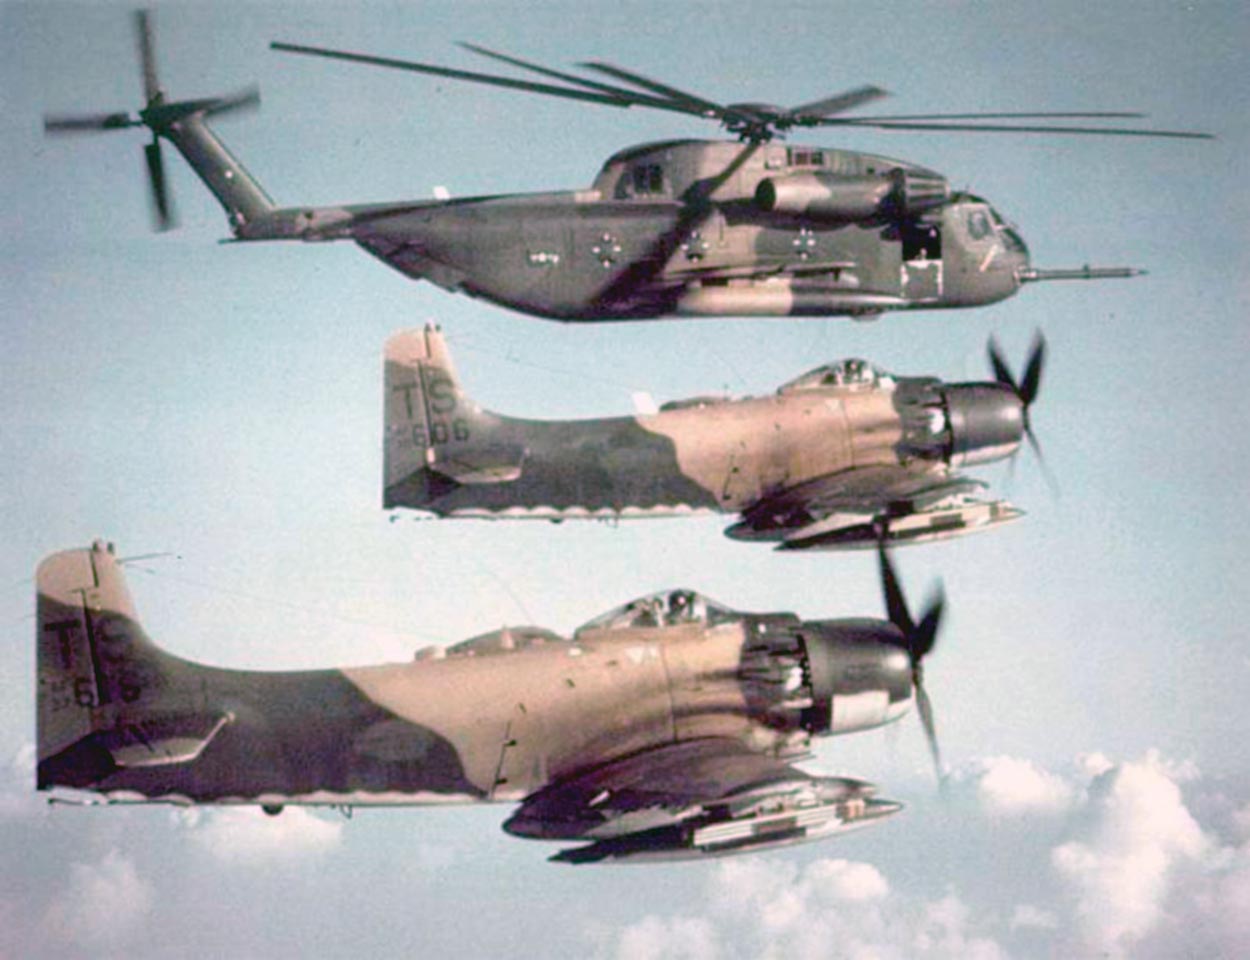 File:USAF helicopters training for Son Tay raid 1970.jpg - Wikimedia Commons